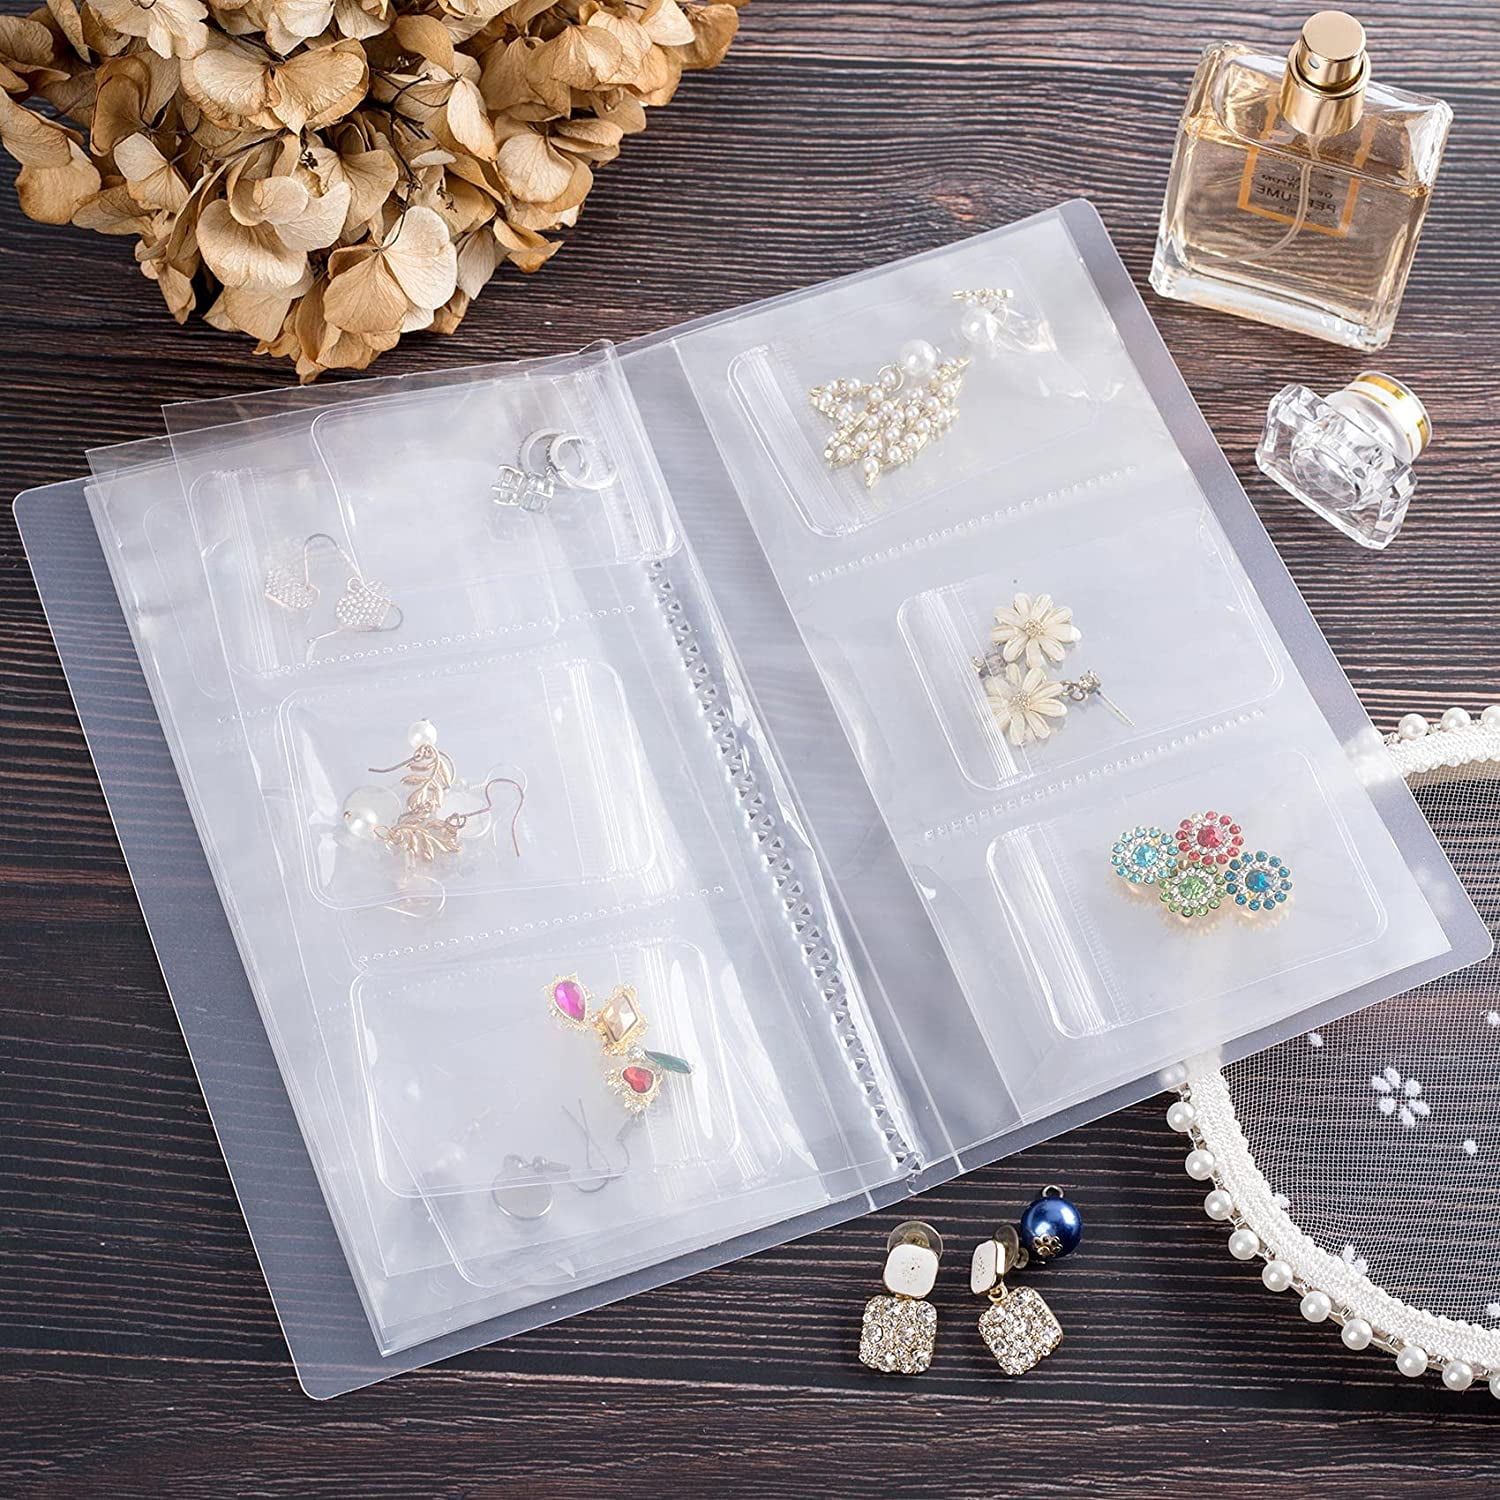 160 Grids Jewelry Storage Book with Button Earrings Necklace Ring Organizer  PVC Transparent Frosted Anti-oxidation Sealing Bags